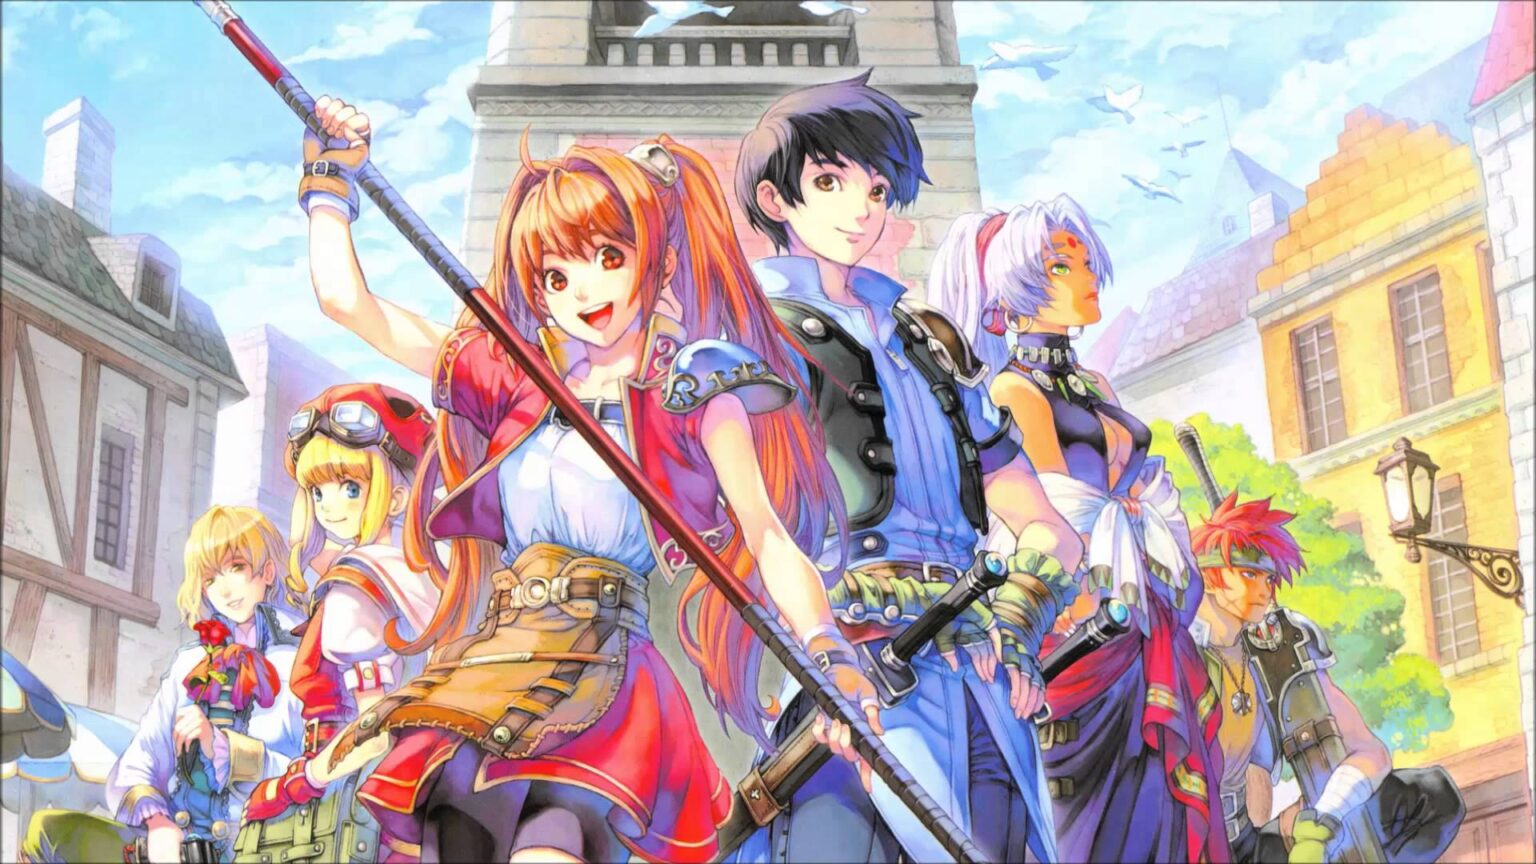 The Legend of Heroes: Trails to Azure for mac download